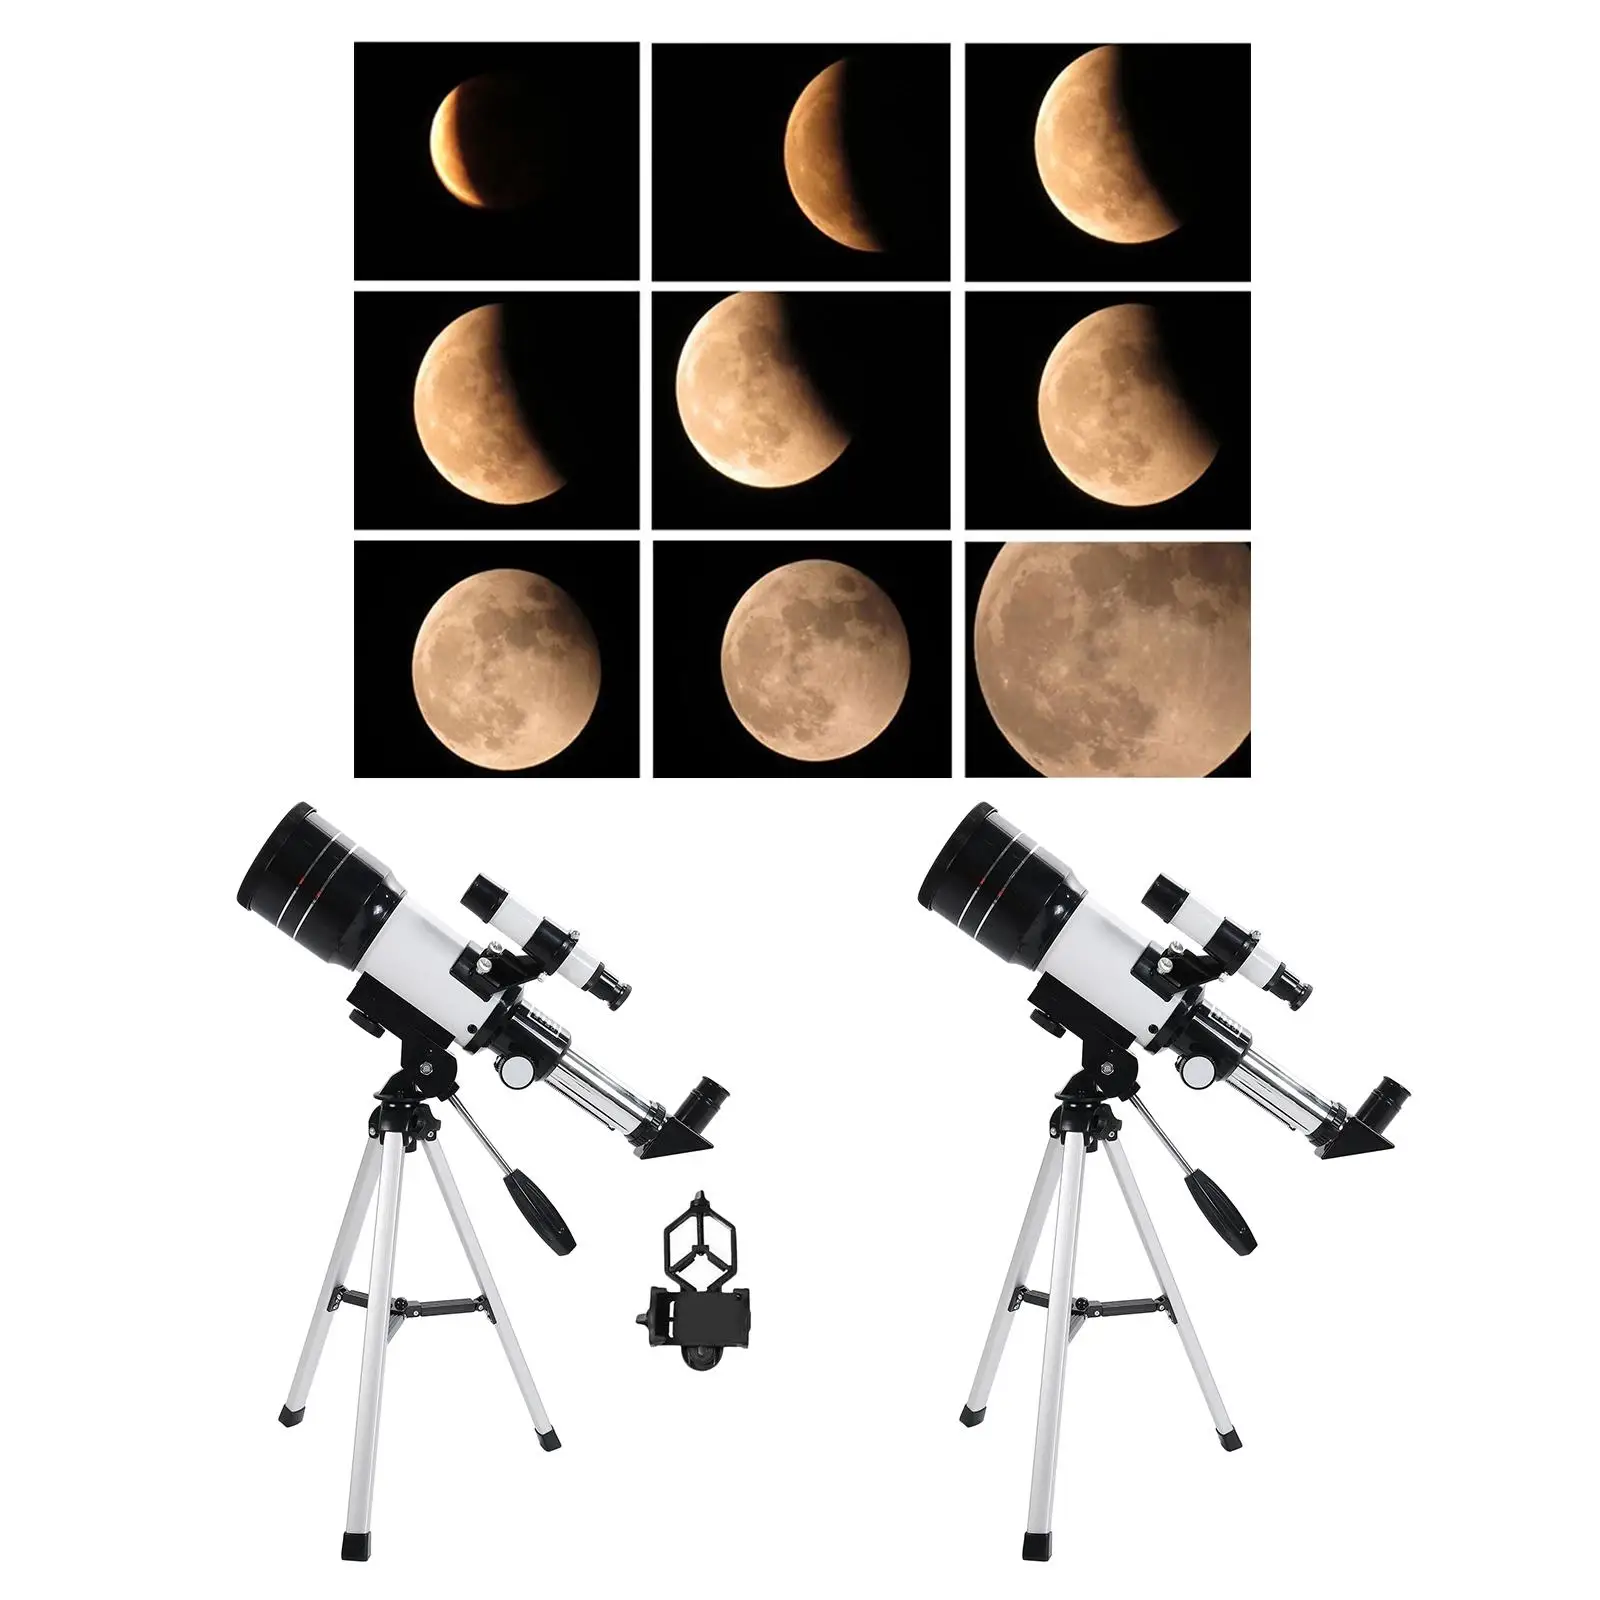 Portable F30070 Zoom 150X Astronomical Reflector Telescope Set With Tripod